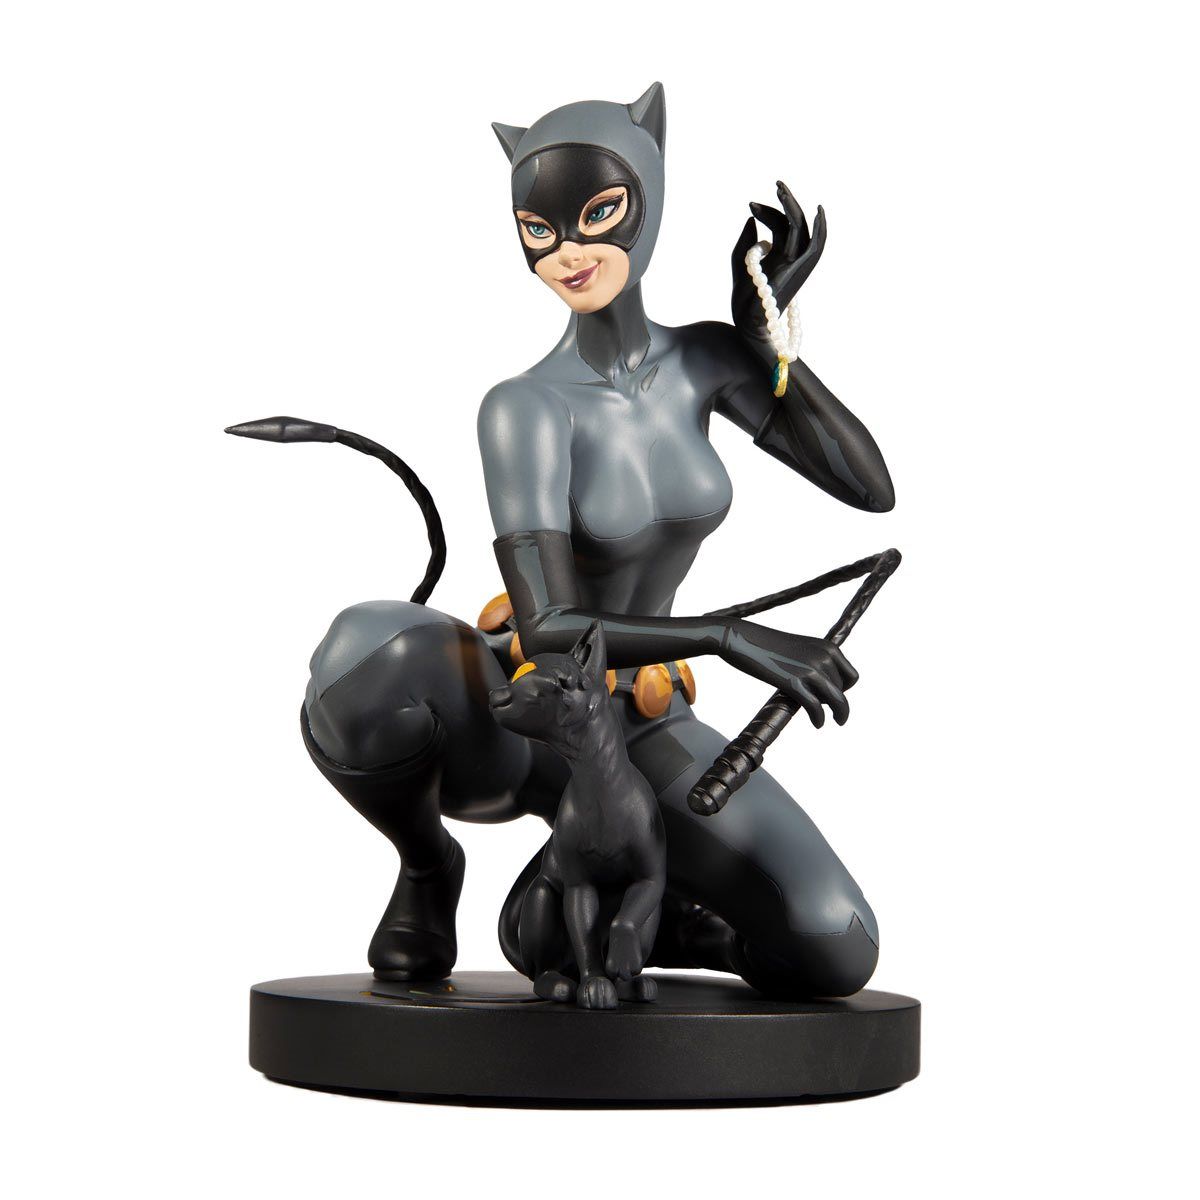 DC Designer Series Statues Now Available For Pre-Order